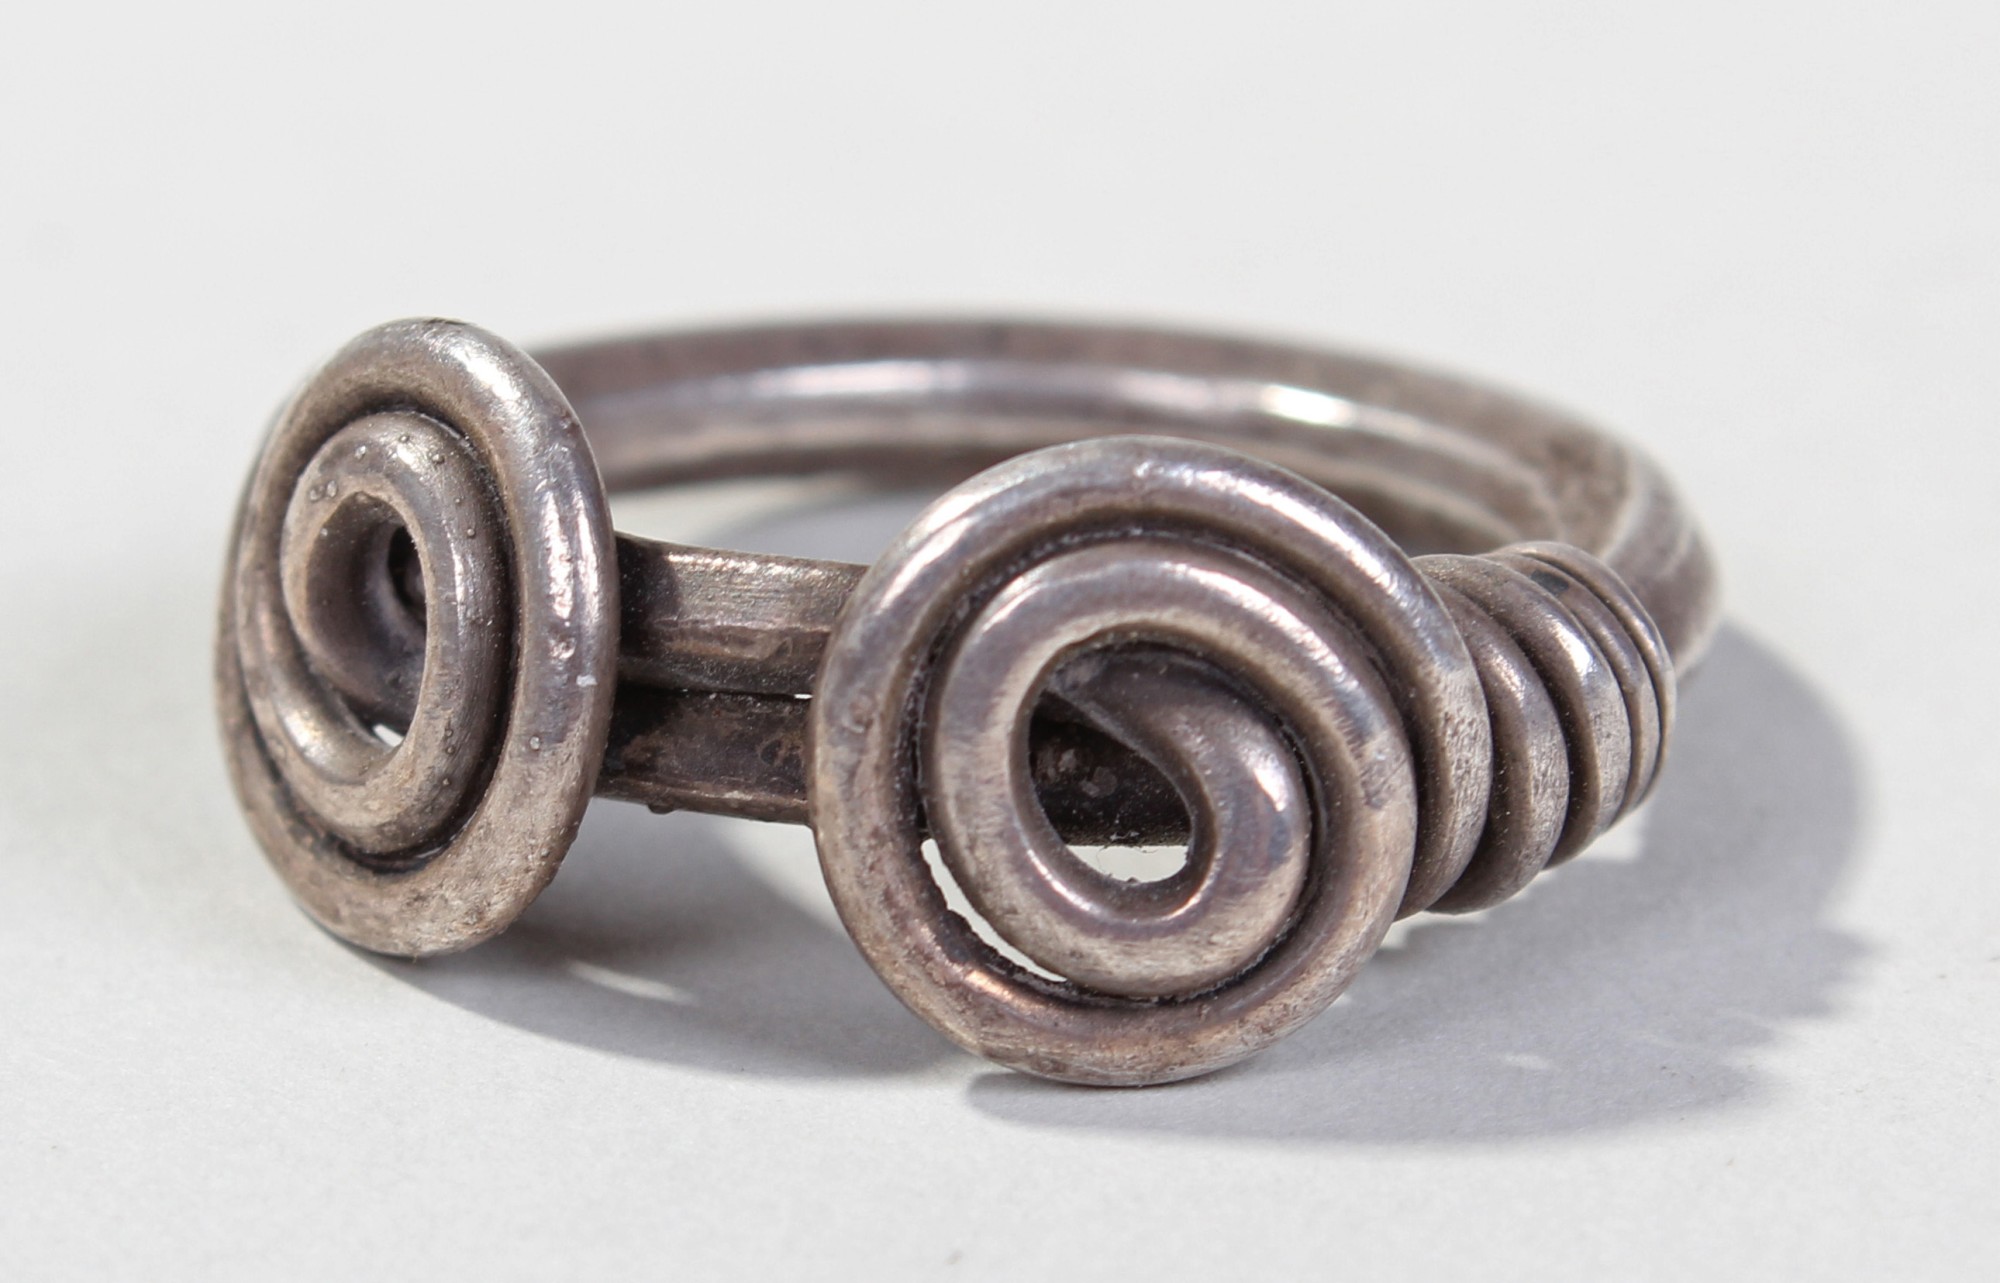 Viking silver finger or toe ring, 800-1000 A.D. wound from a single tapered rod of silver,